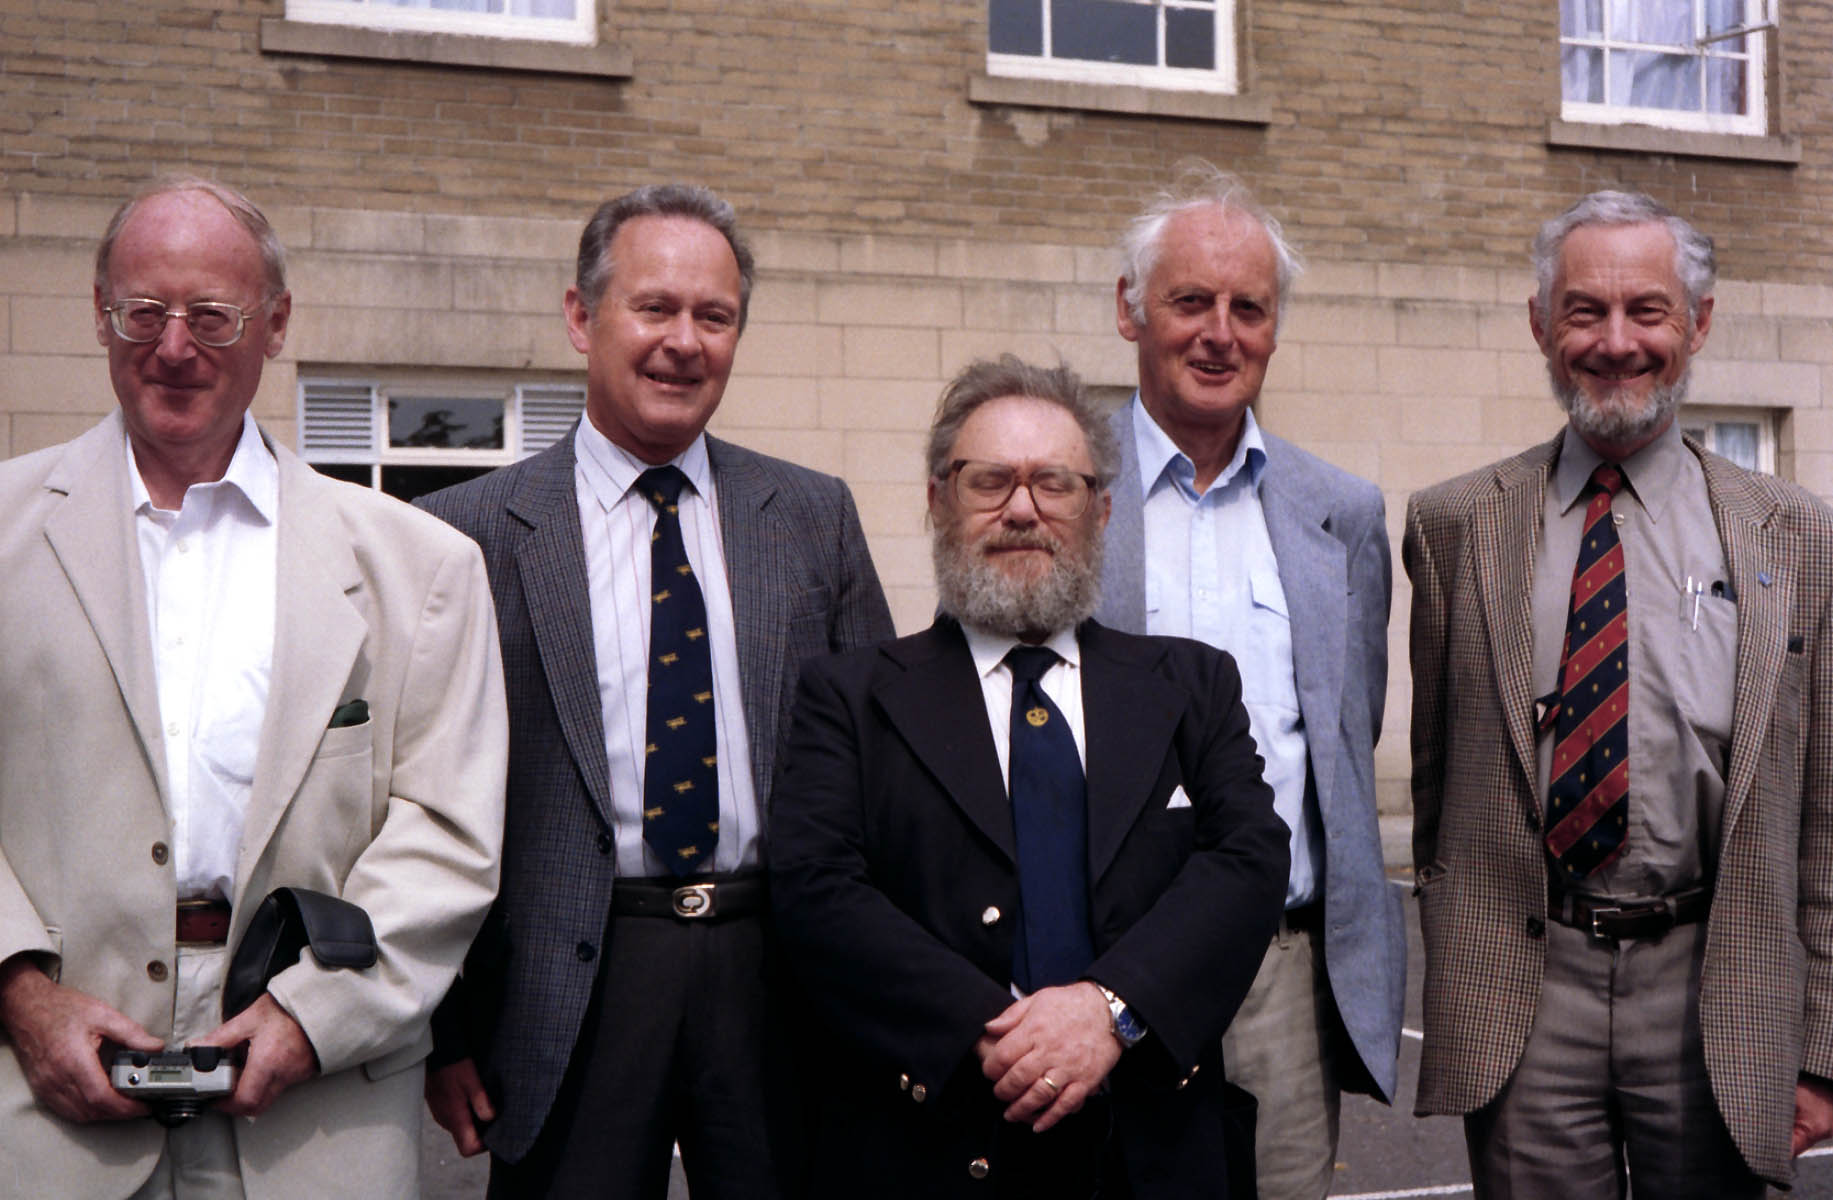 Harry with members of DAS at Westpark Hall SAG meeting August 2003